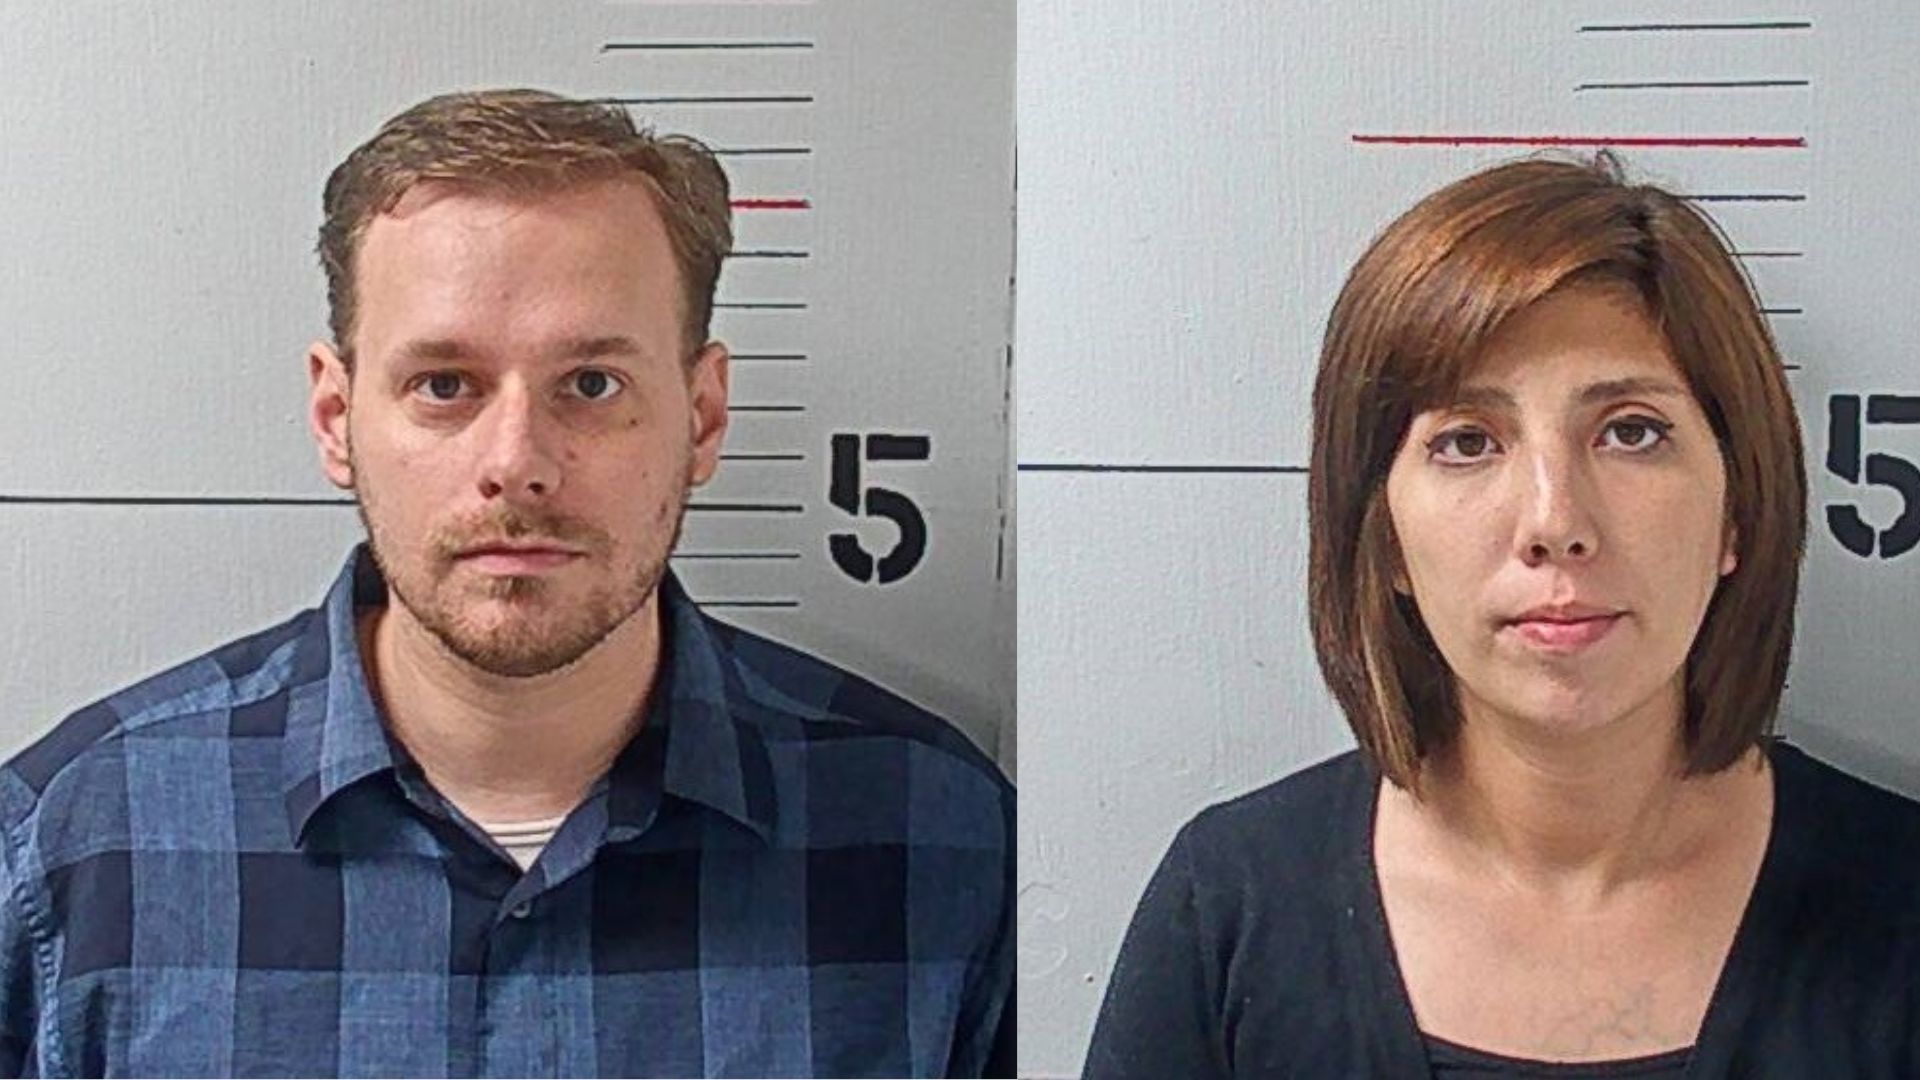 Evangelist, wife face multiple child rape, sexual abuse charges in Tennessee picture